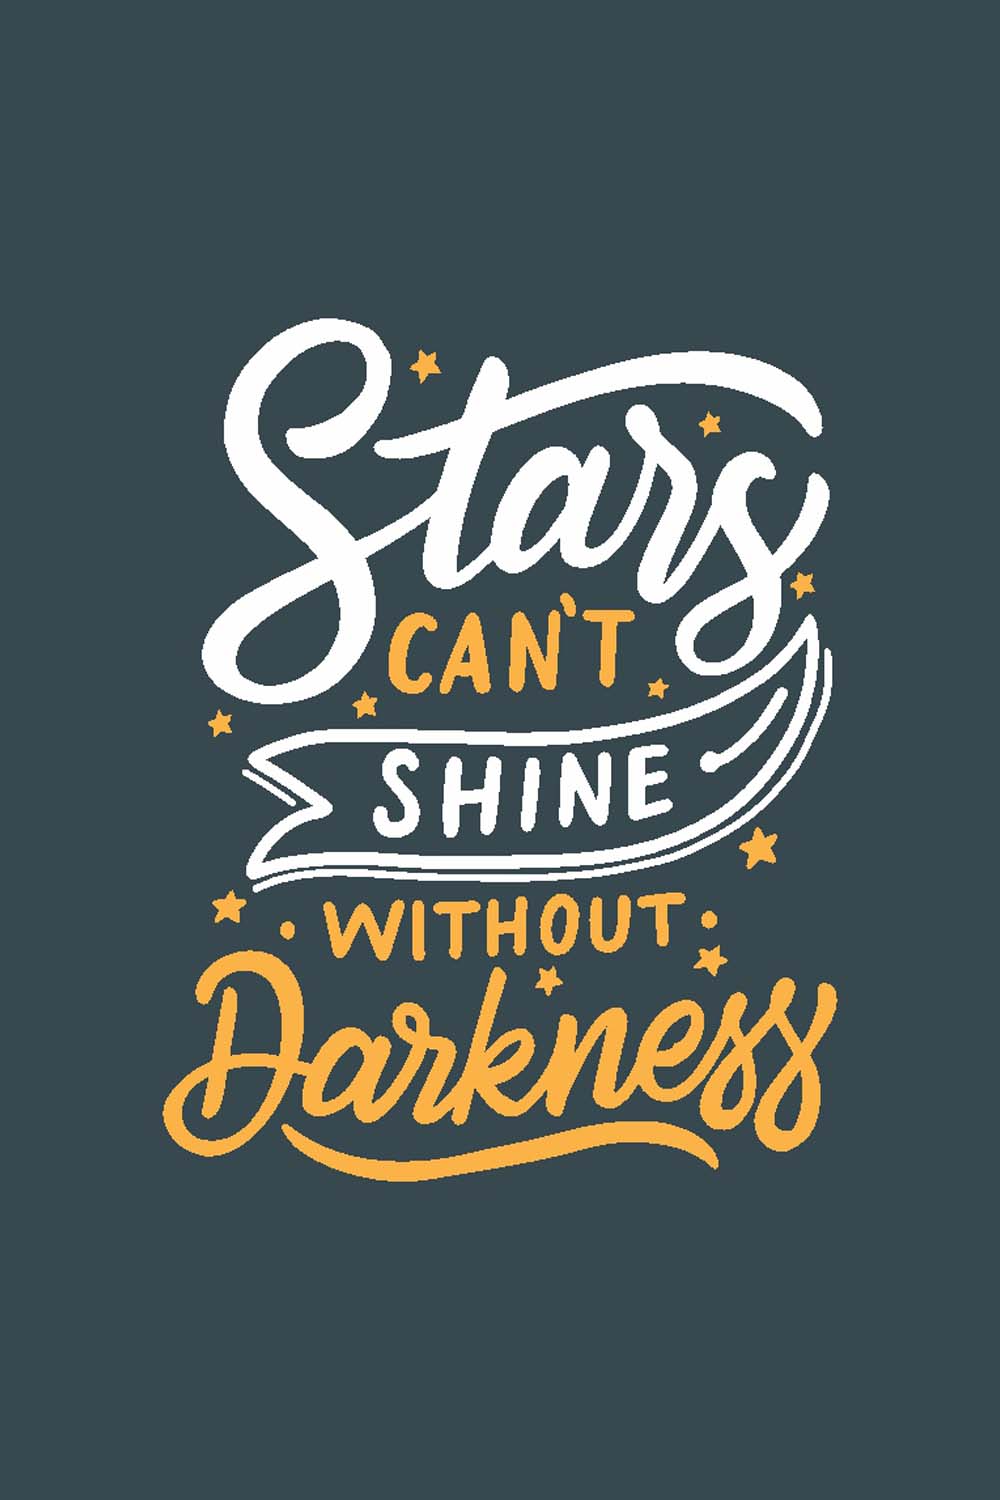 Stars Can's Shine Without Darkness - Glass Framed Poster